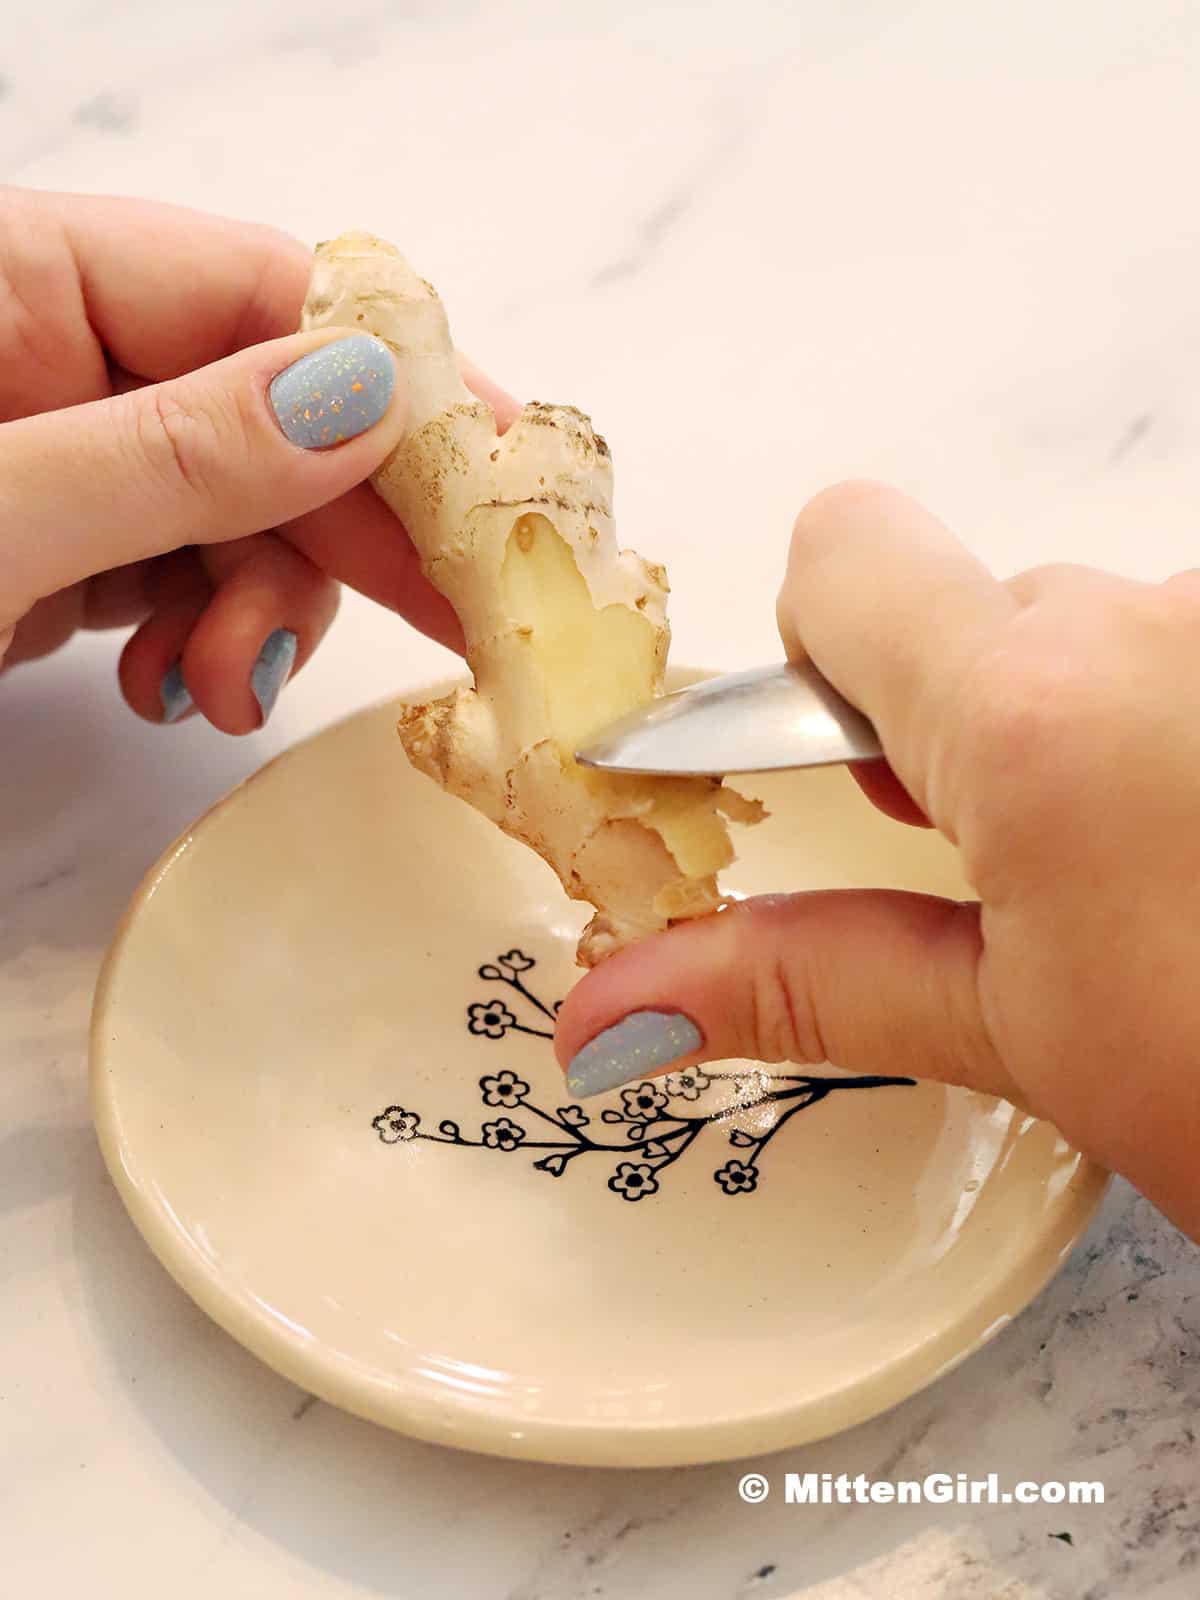 Hands holding a ginger root and using a spoon to peel it.